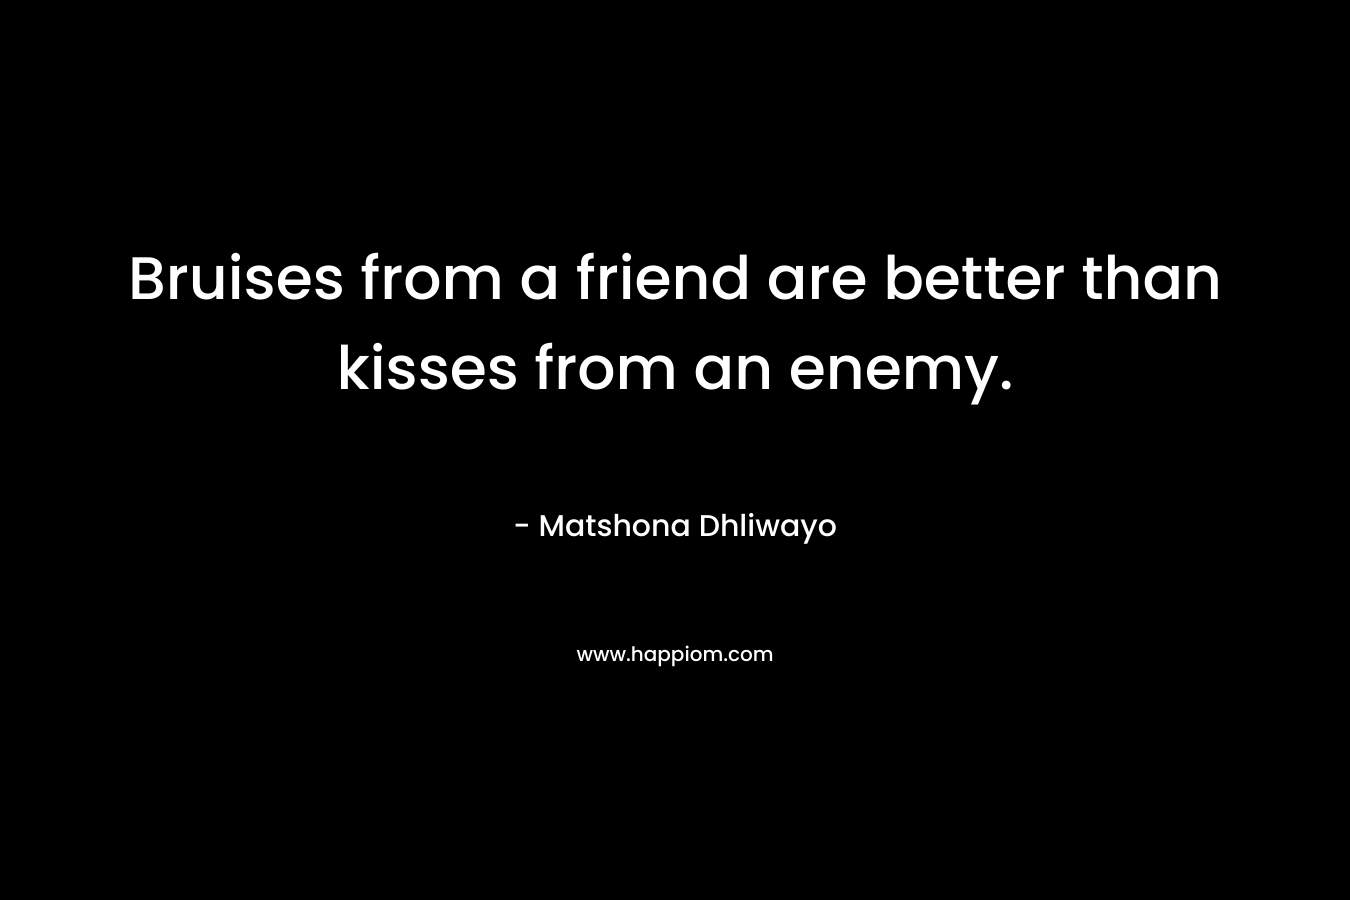 Bruises from a friend are better than kisses from an enemy.